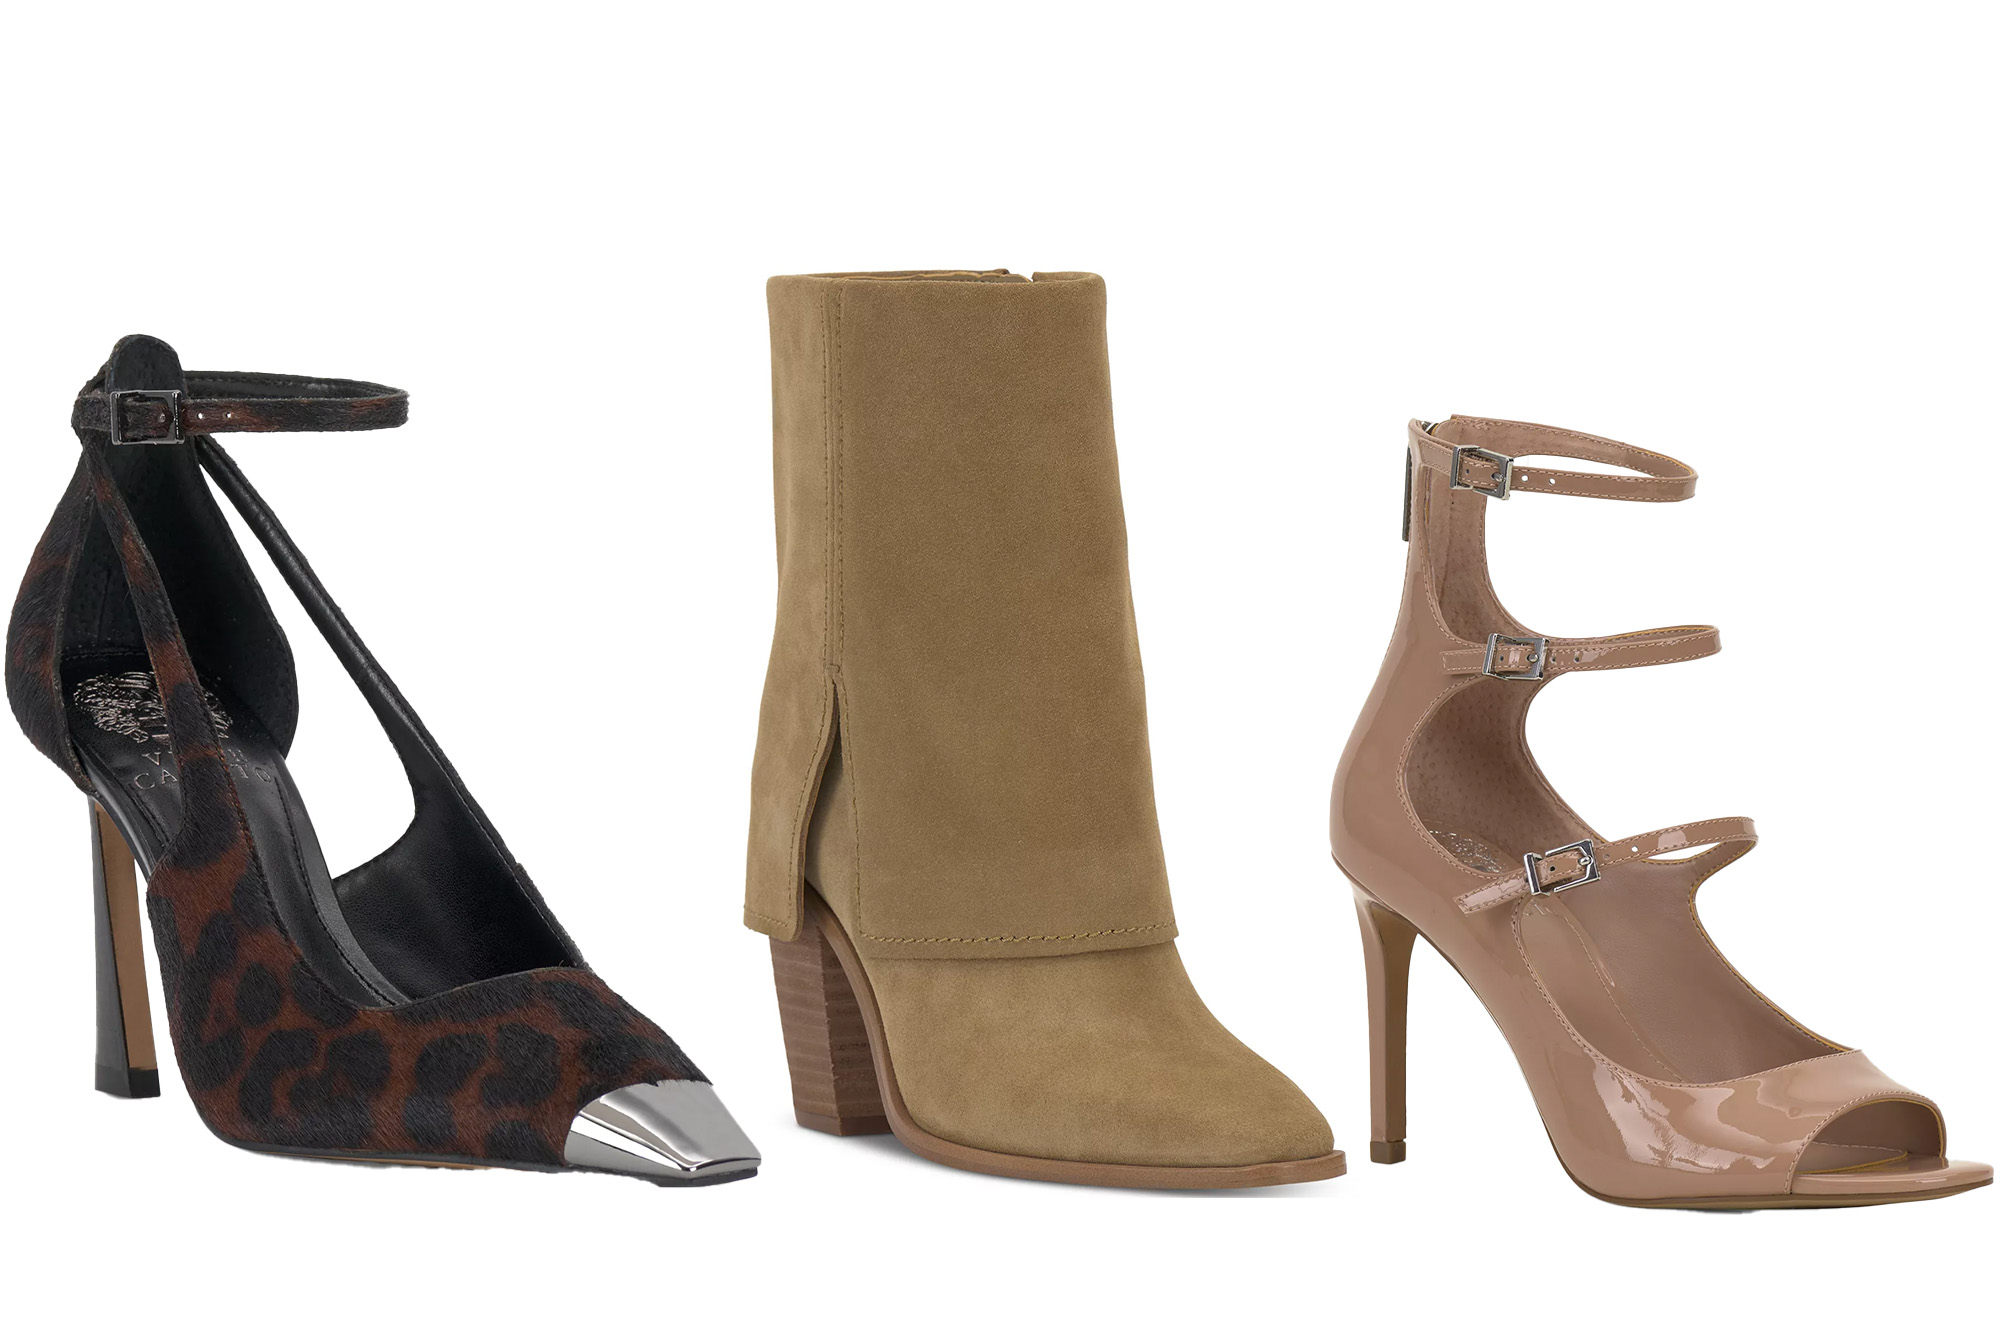 Vince Camuto Shoes, Boots, Heels & More